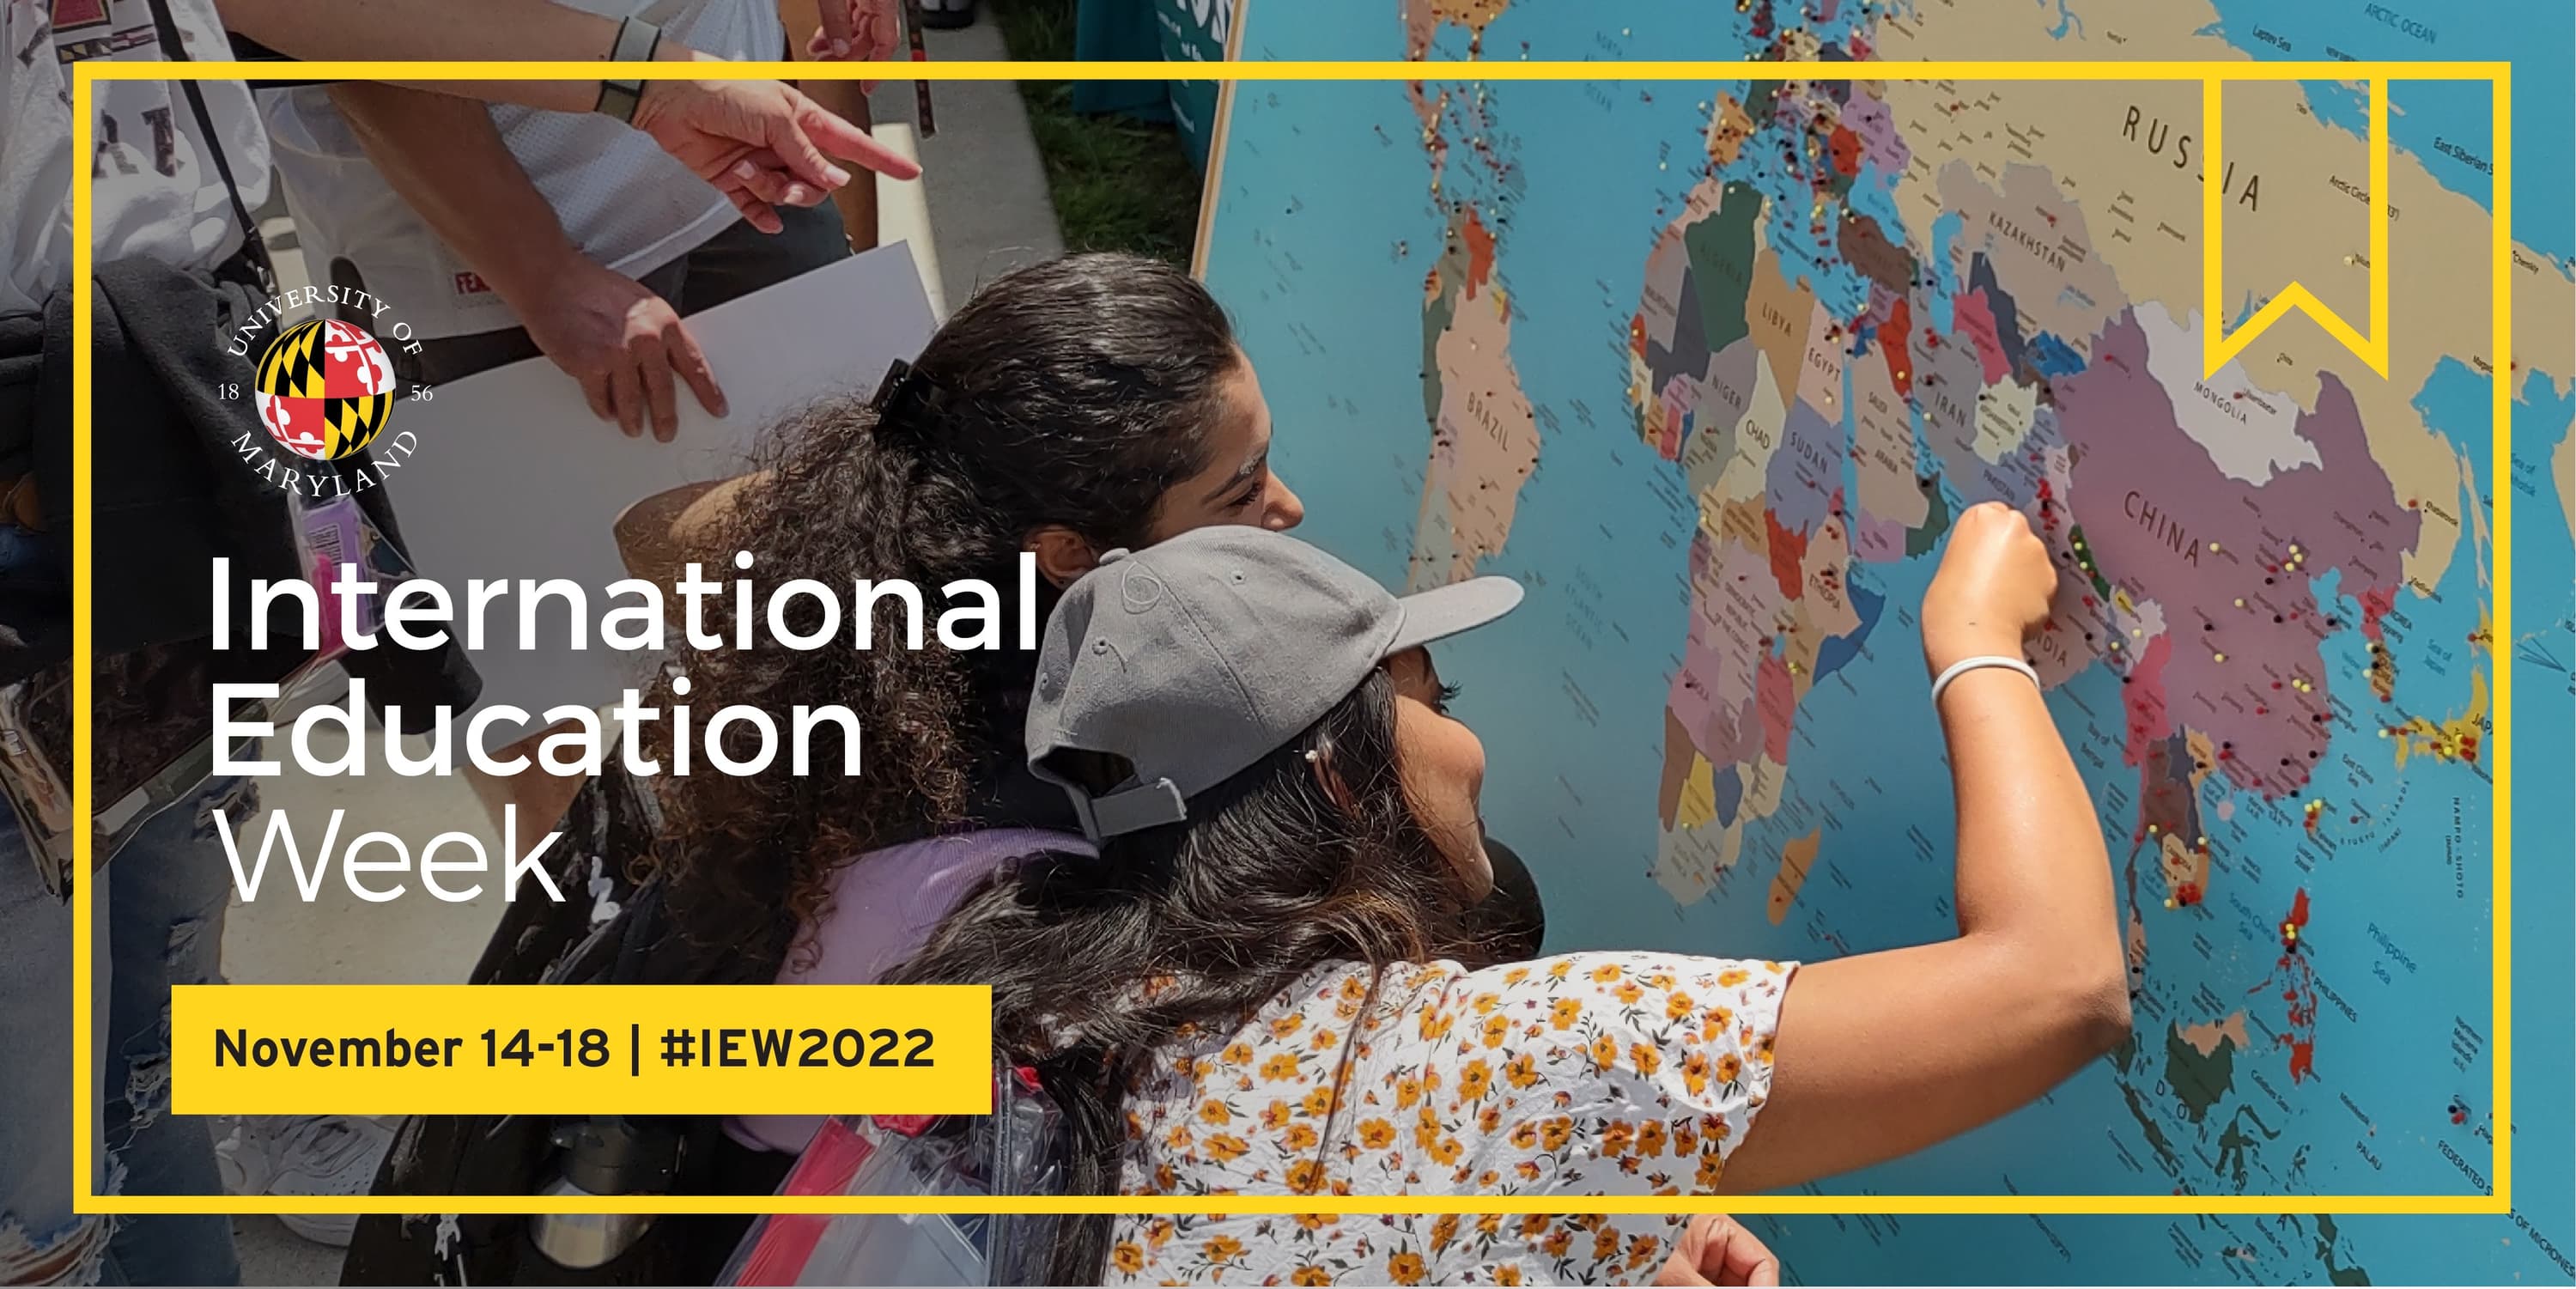 Two students place pins into a large map of the world. Overlaying text reads: International Education Week, November 14-18 #IEW2022